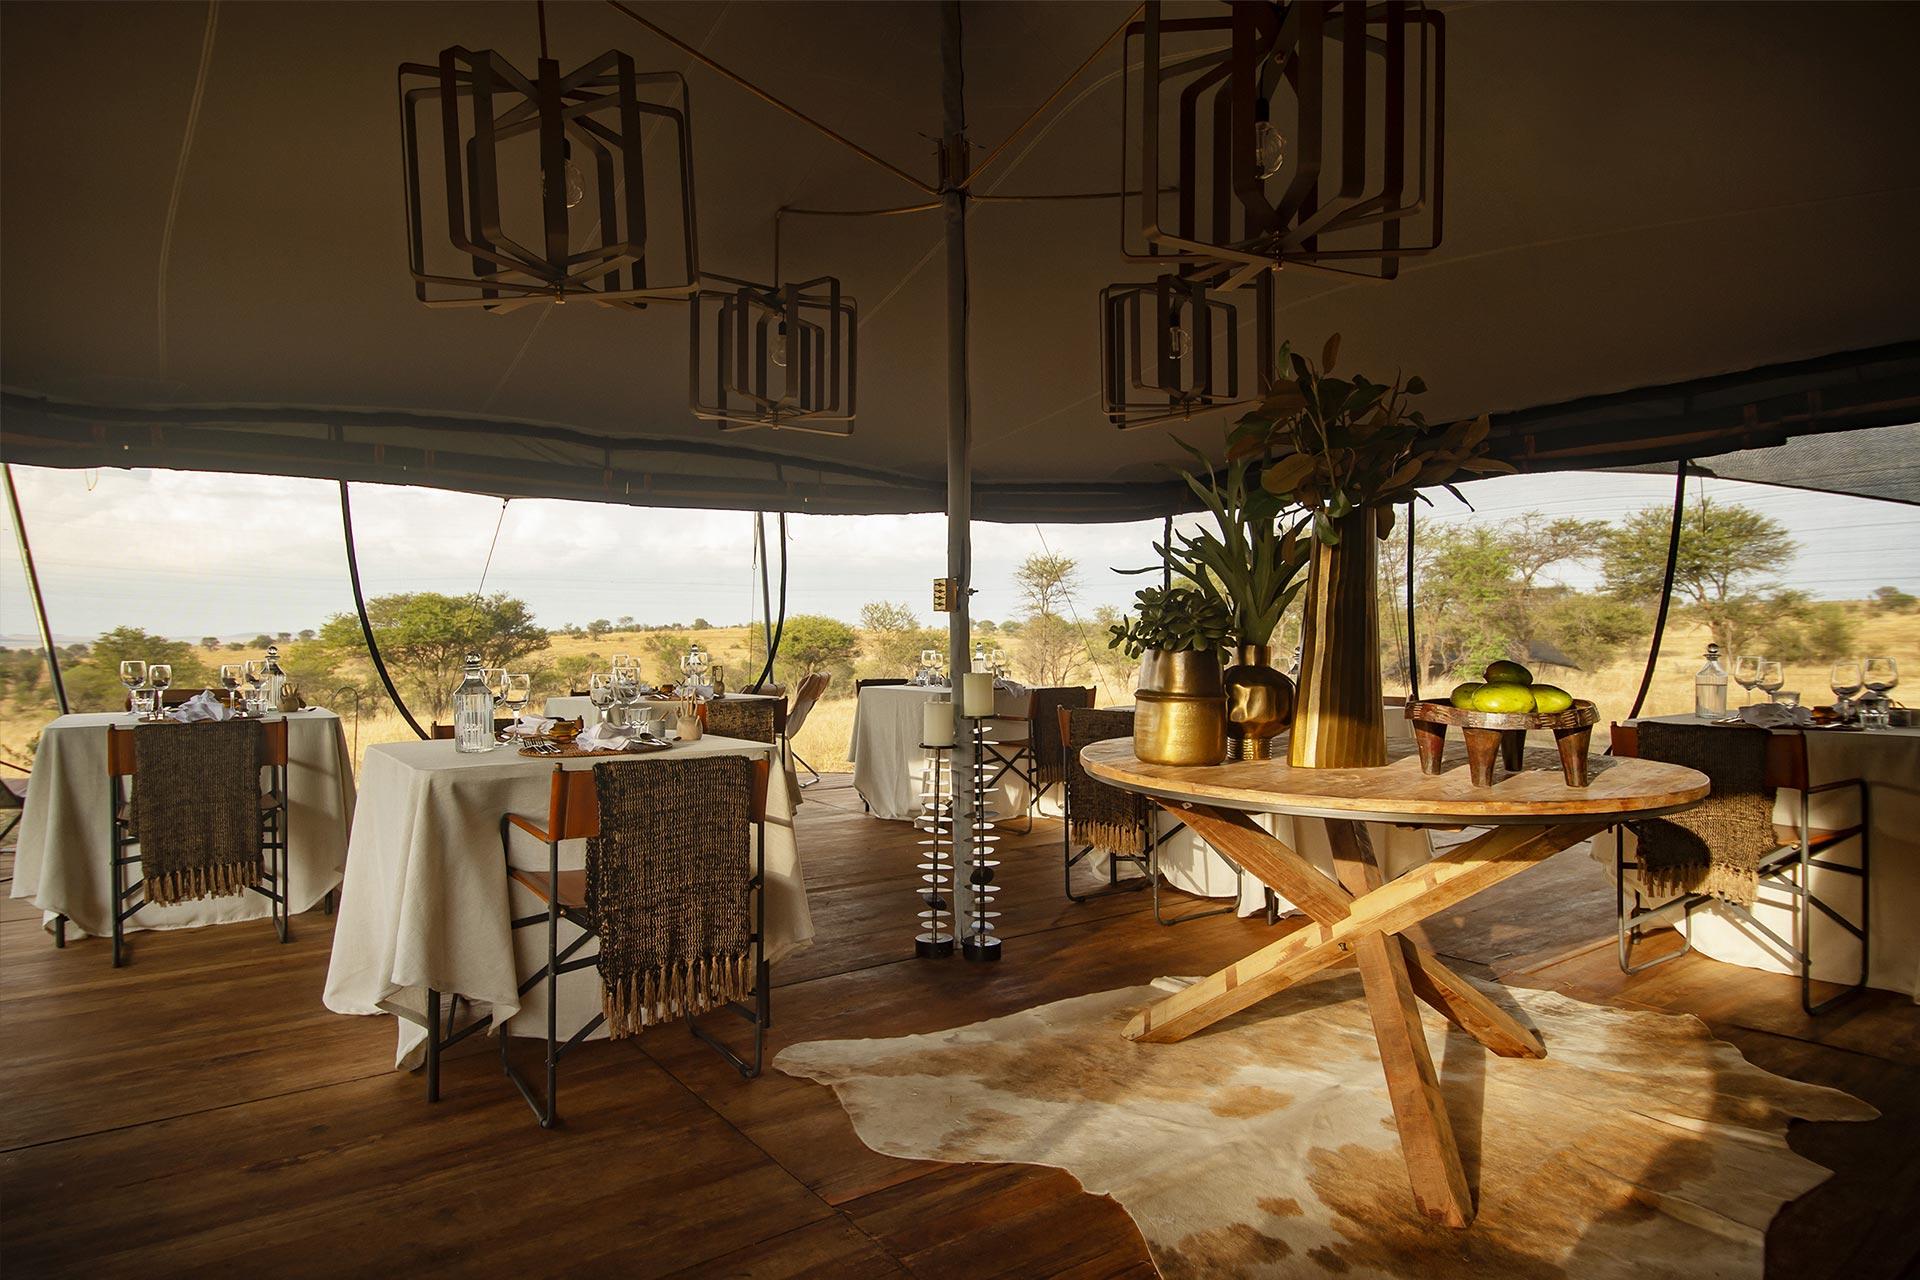 The Siringit Migration Camp brings five-star luxury to the mobile safari experience